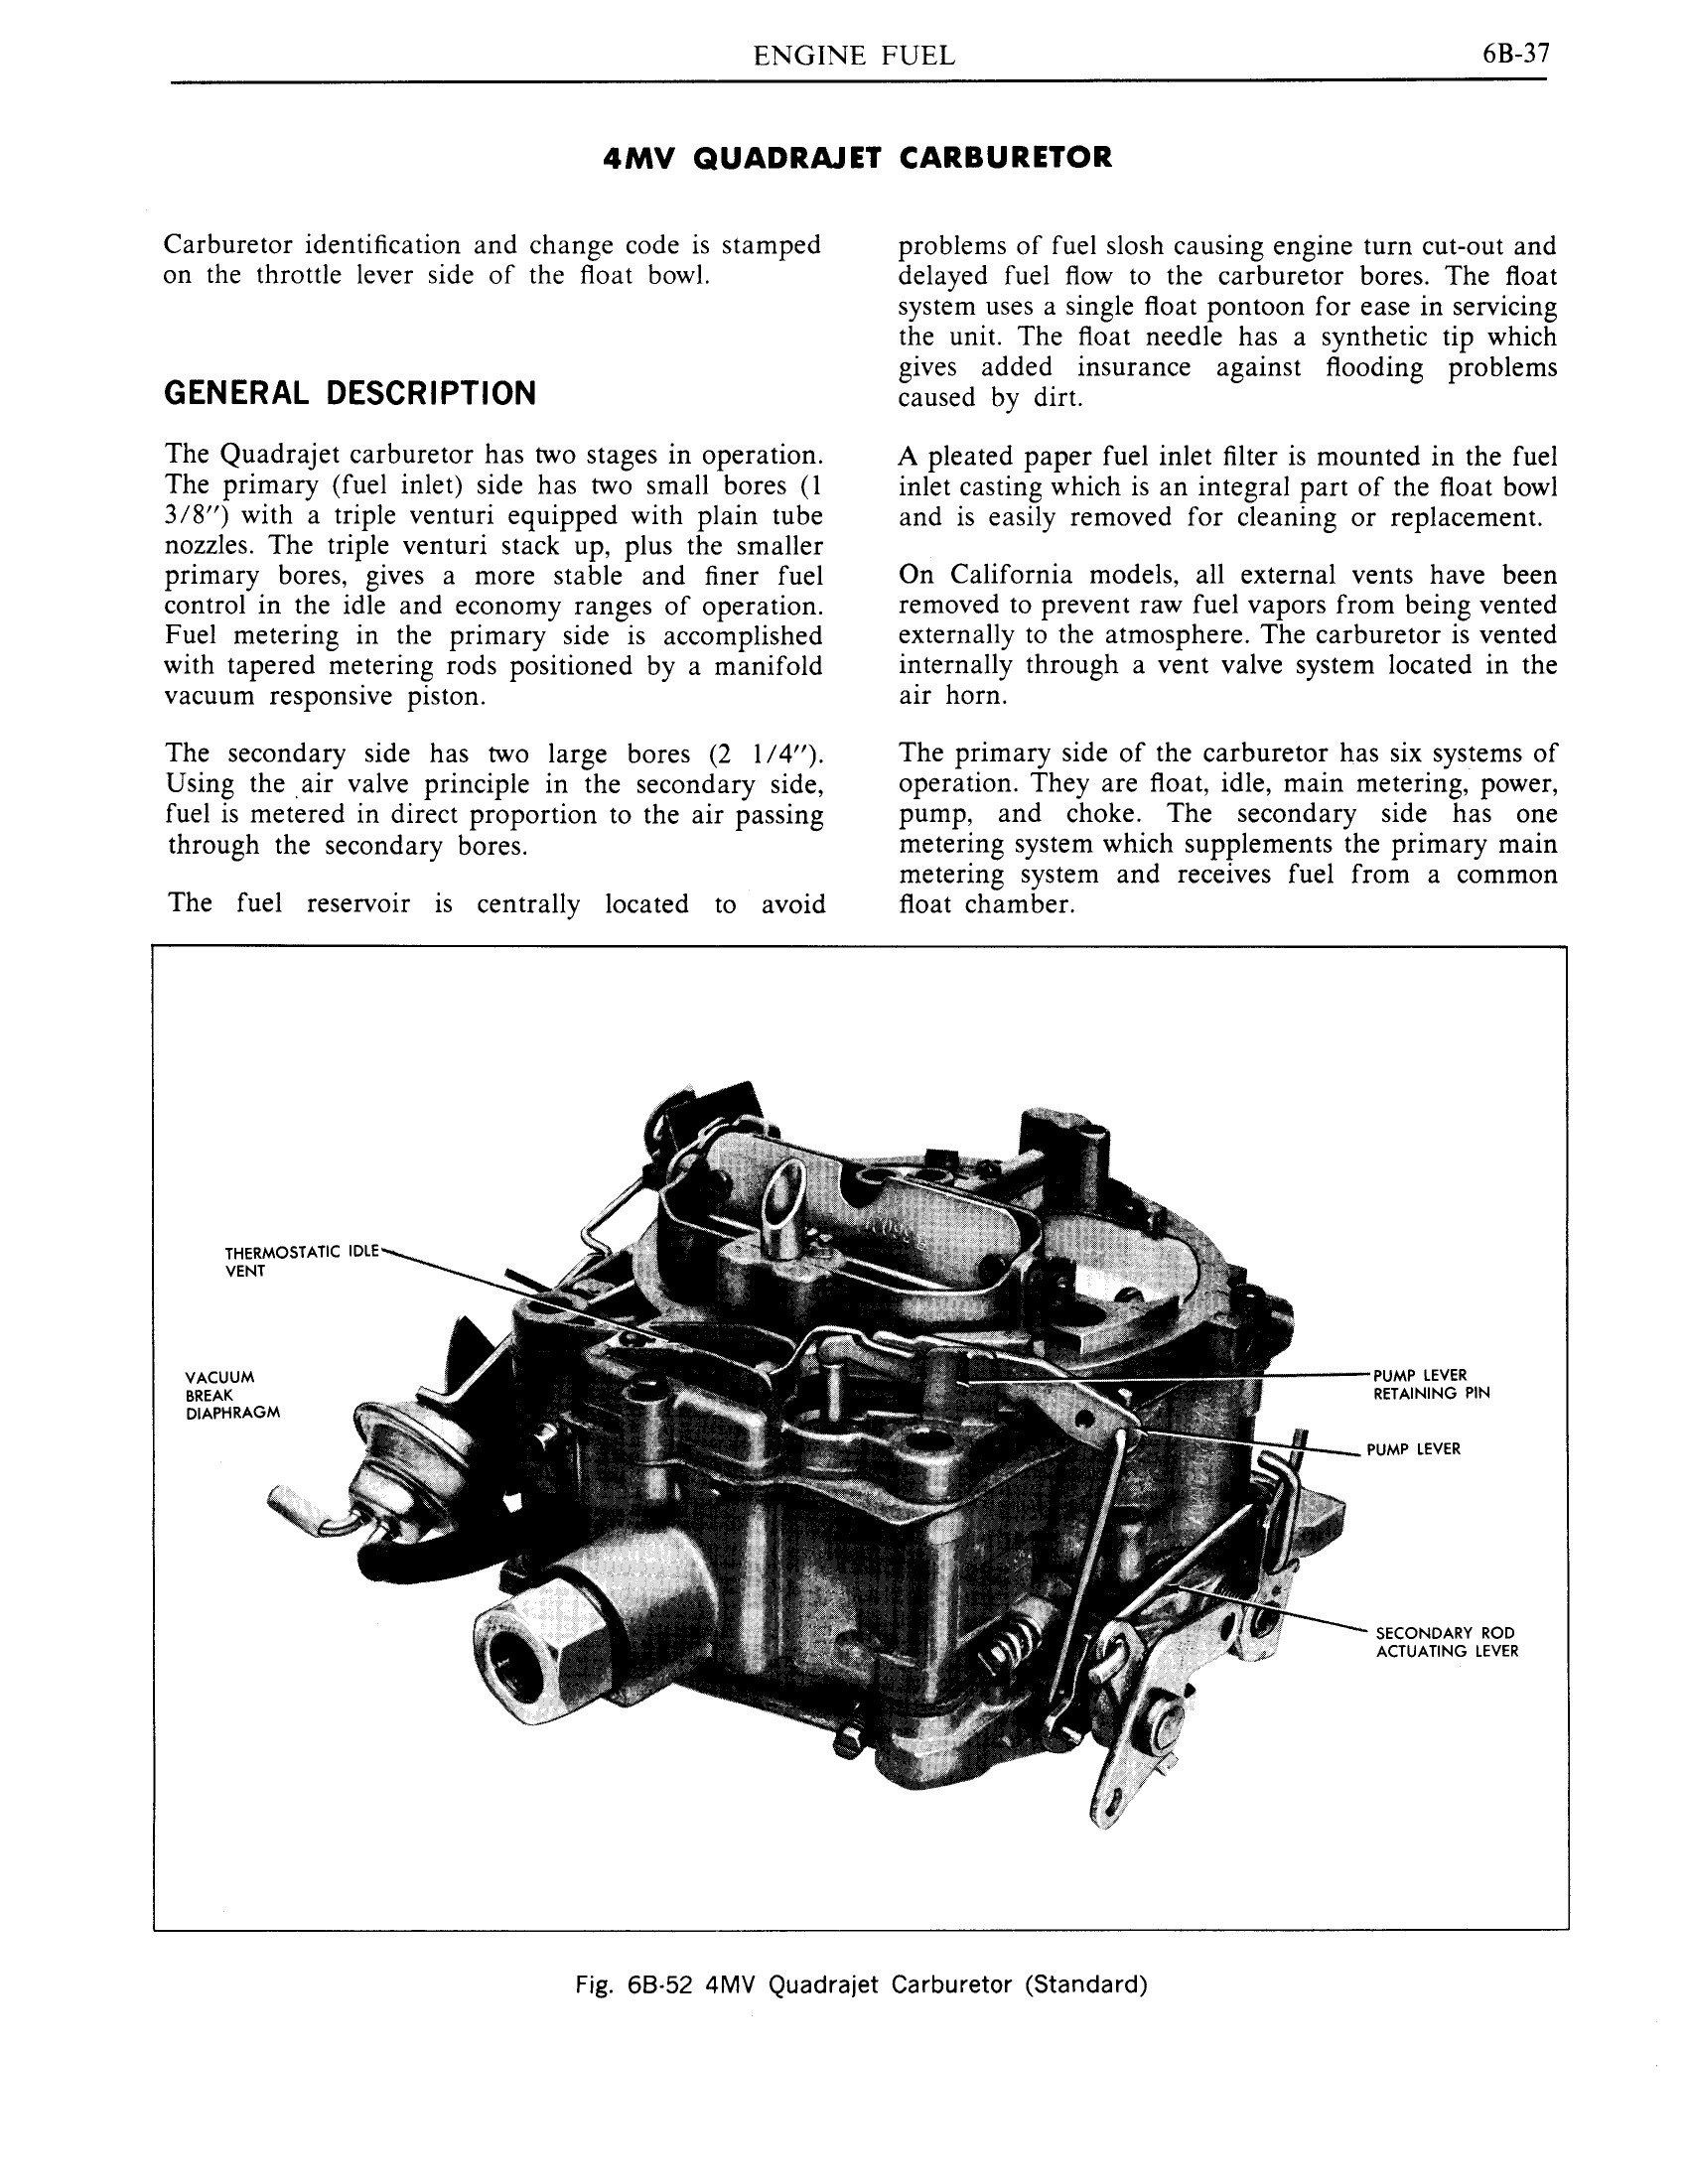 1970 Pontiac Chassis Service Manual - Engine Fuel Page 37 of 65